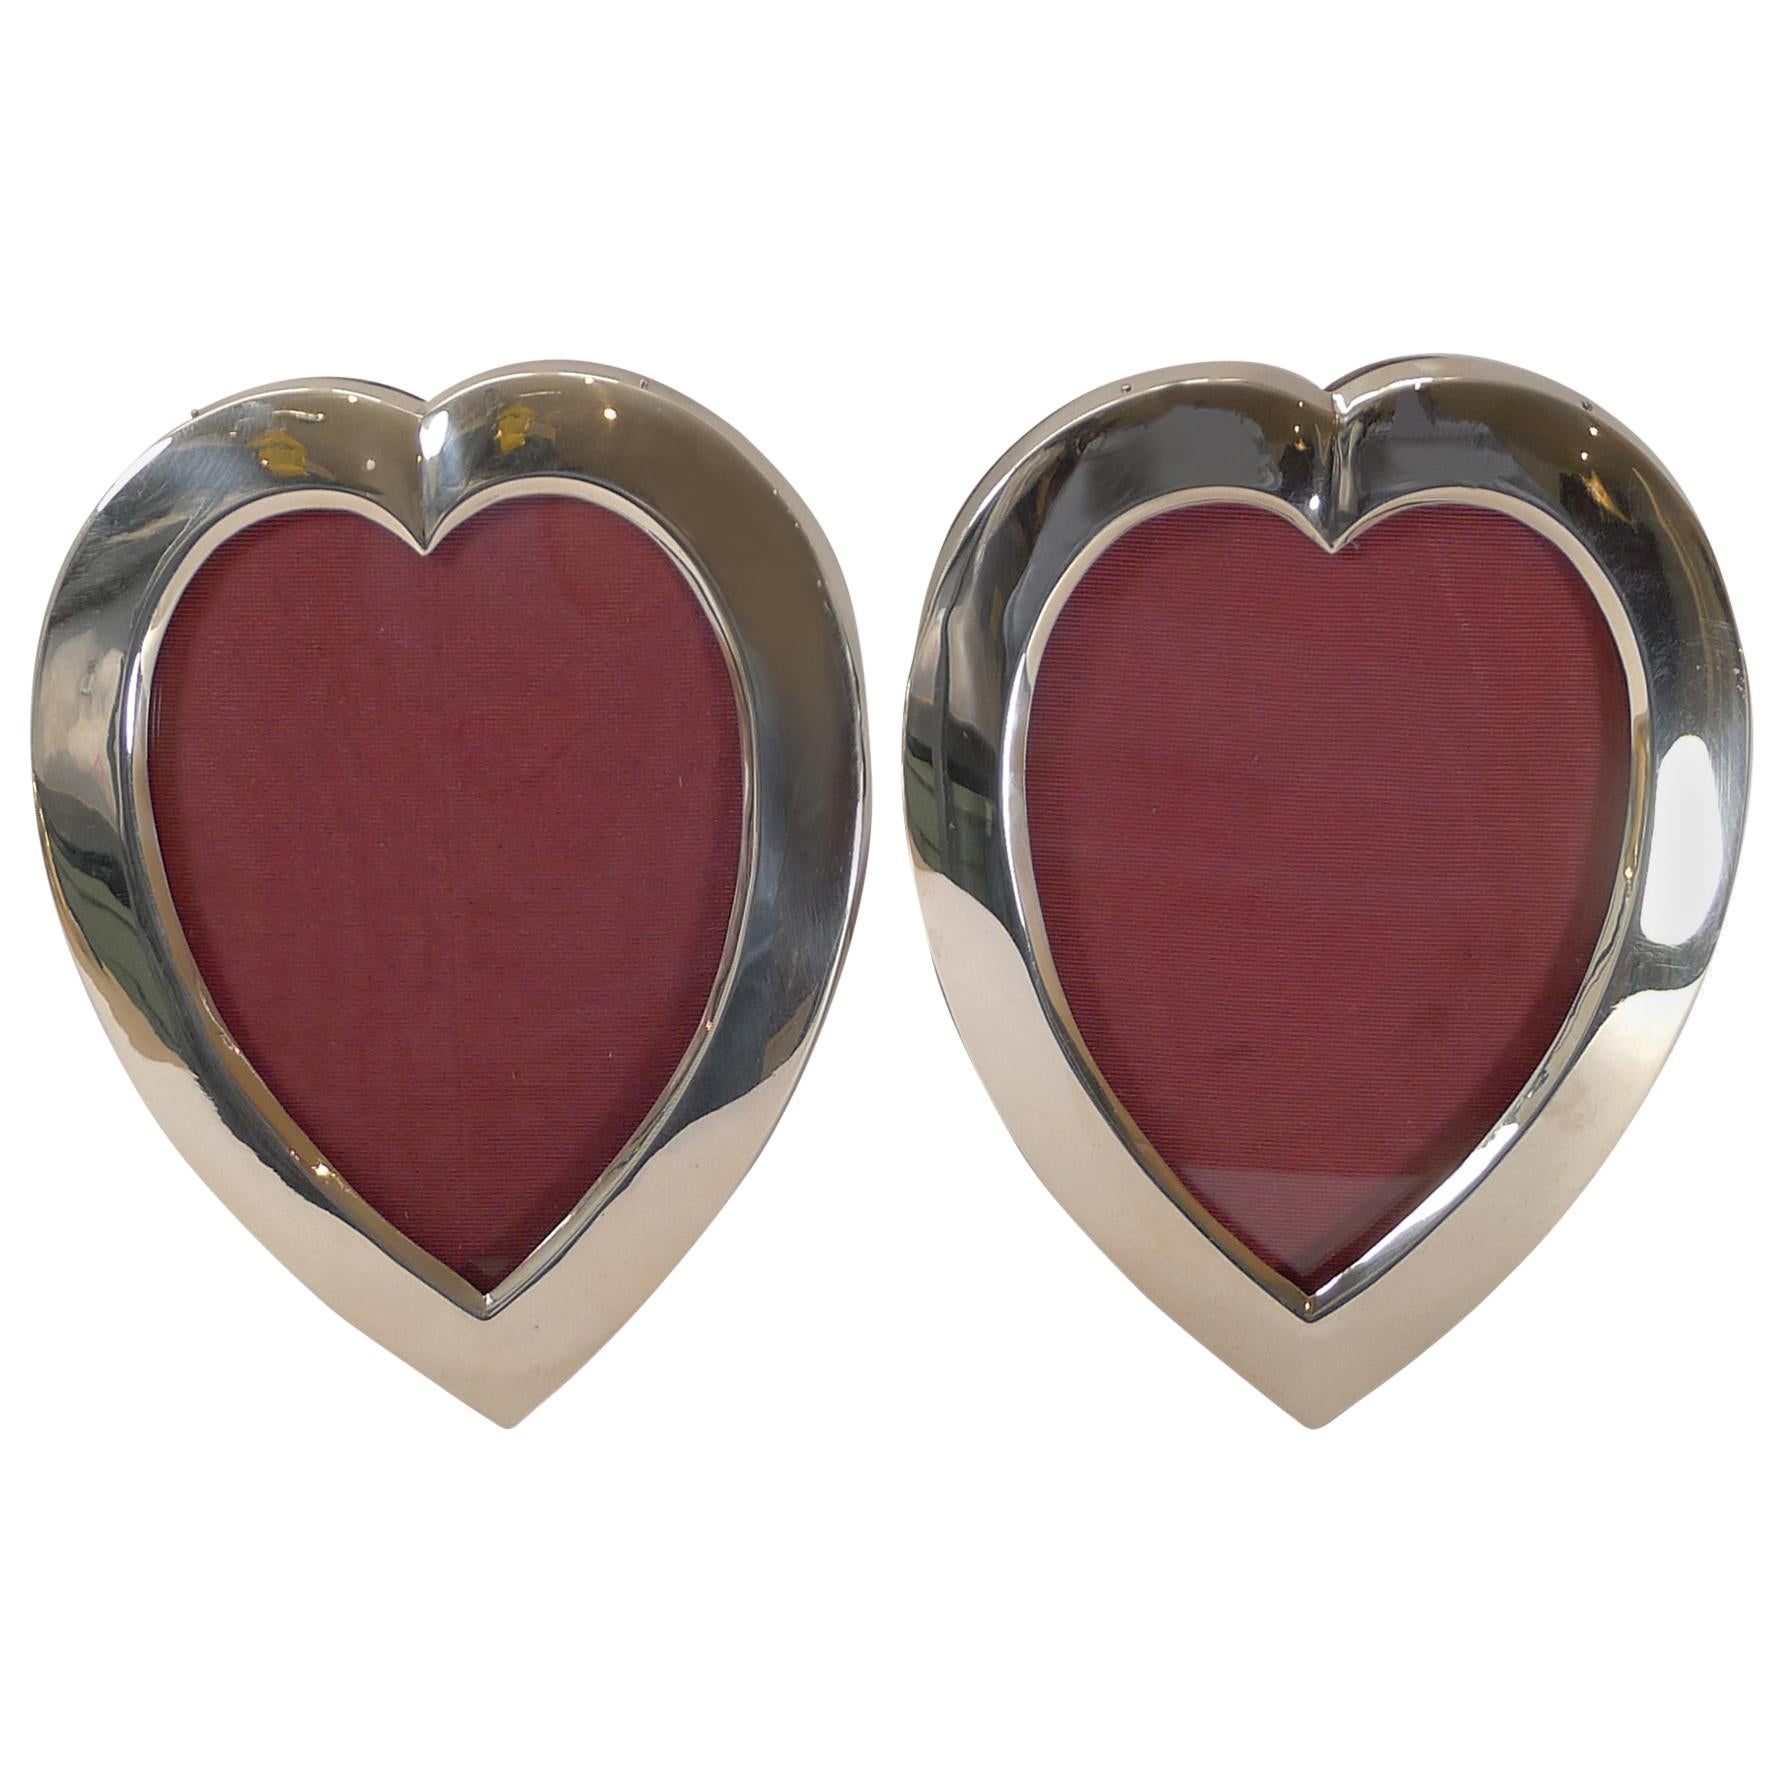 Pair of Antique English Sterling Silver Heart Picture Frames by William Comyns For Sale